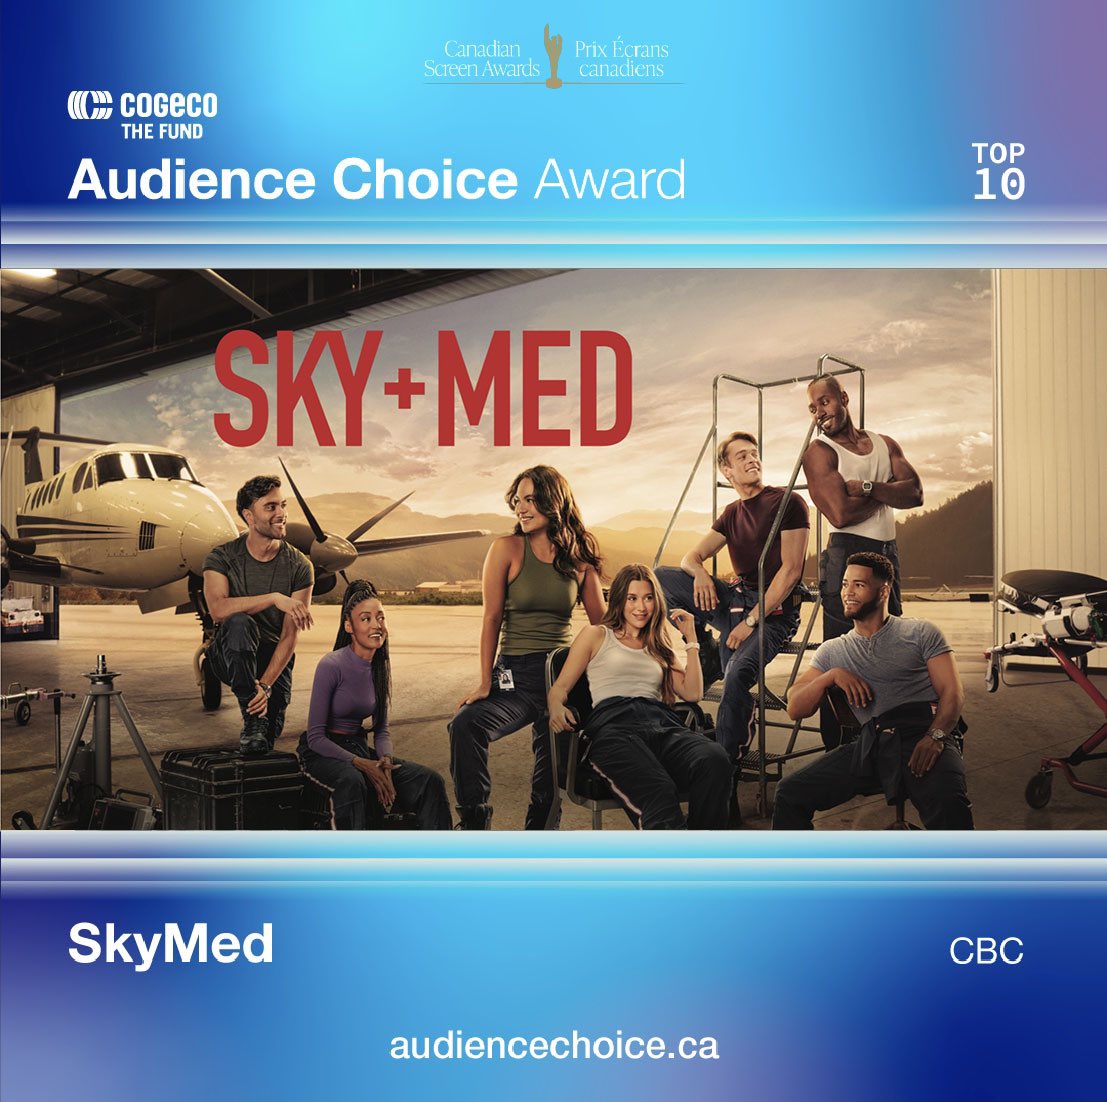 We’re thrilled that #SkyMed is nominated for the Cogeco Fund Audience Choice Award!

Voting for Round 1 is now open at:
audiencechoice.ca

You can vote every day, up to 100x a day!